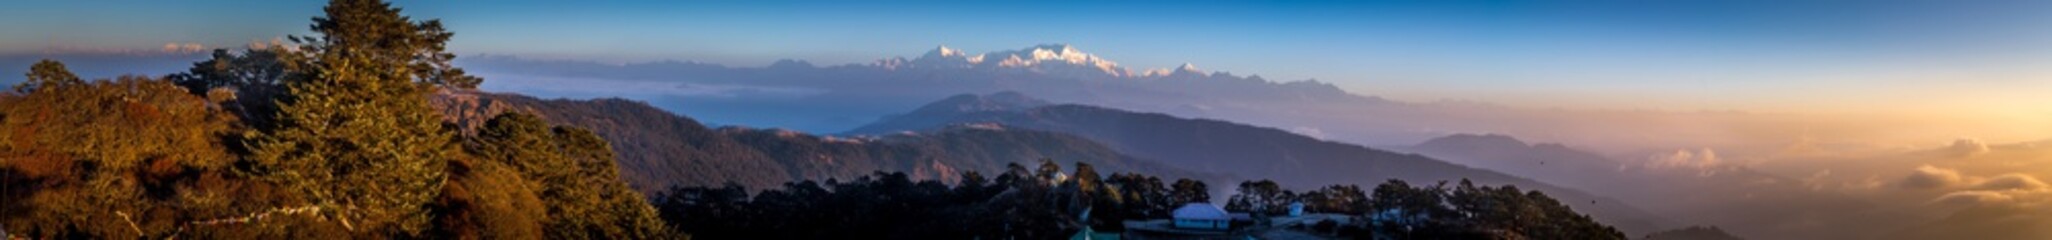 Kanchenjunga and Everest in a single frame, Sandakphu,West Bengal, india